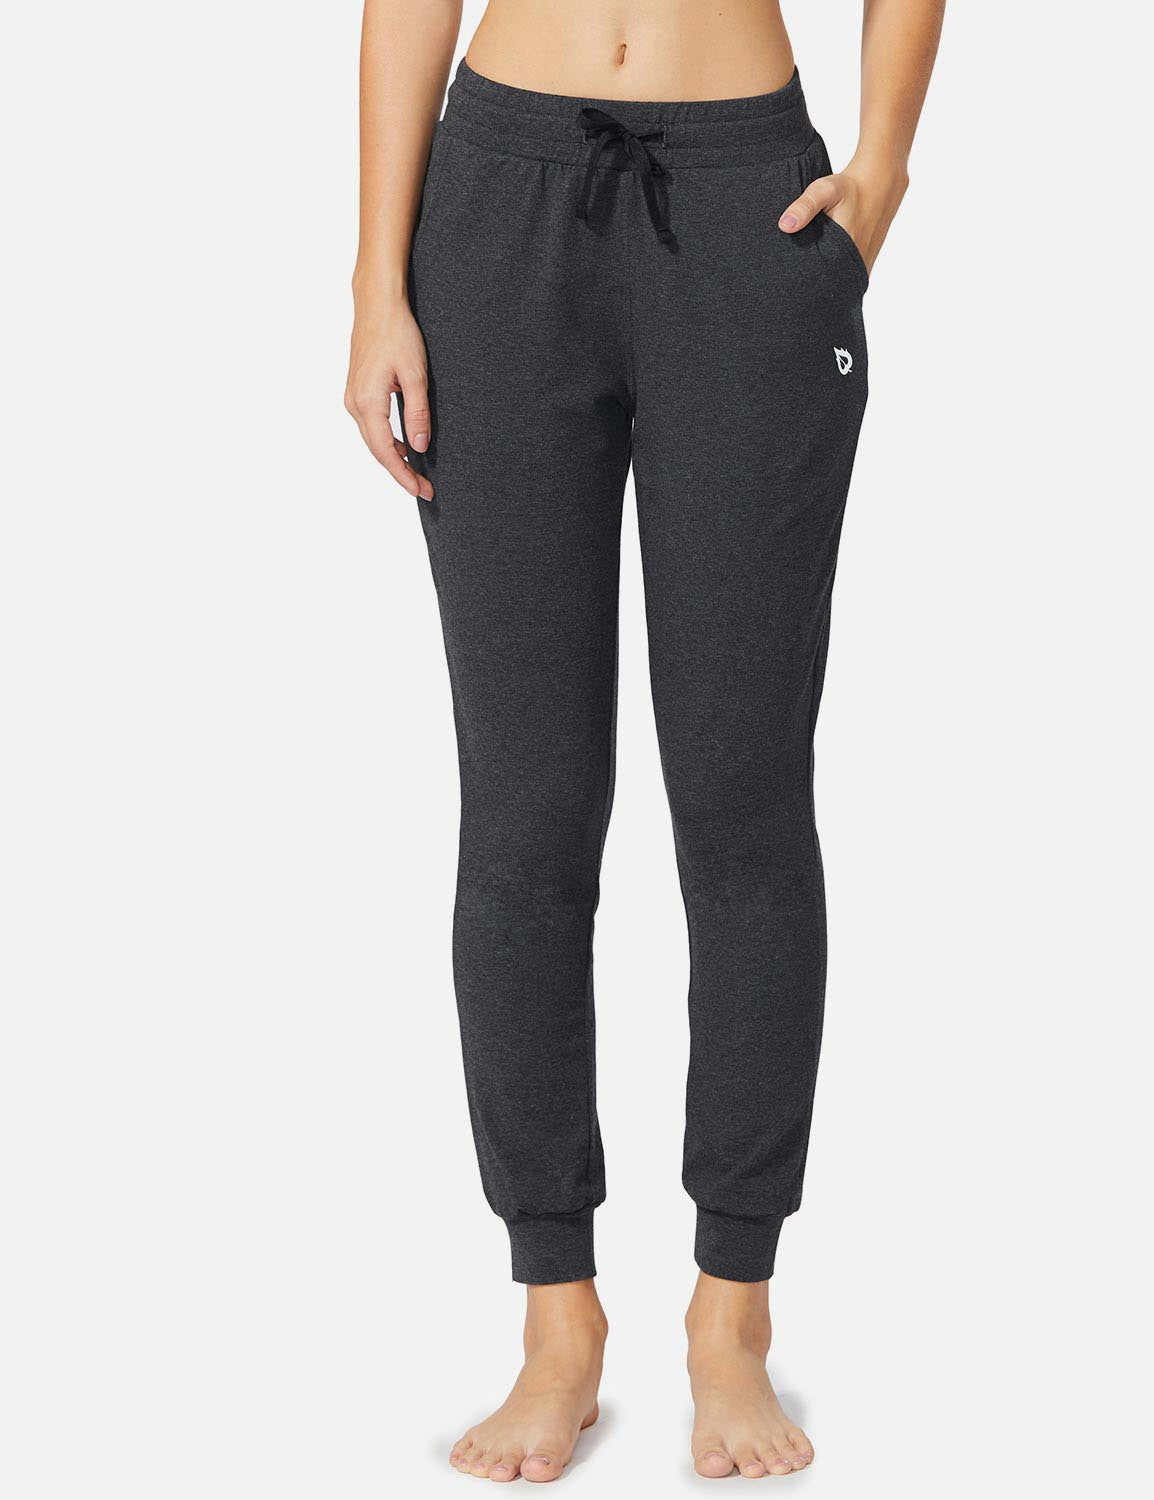 Baleaf Women's Cotton Comfy Pocketed & Tapered Weekend Joggers abh103 Charcoal Front